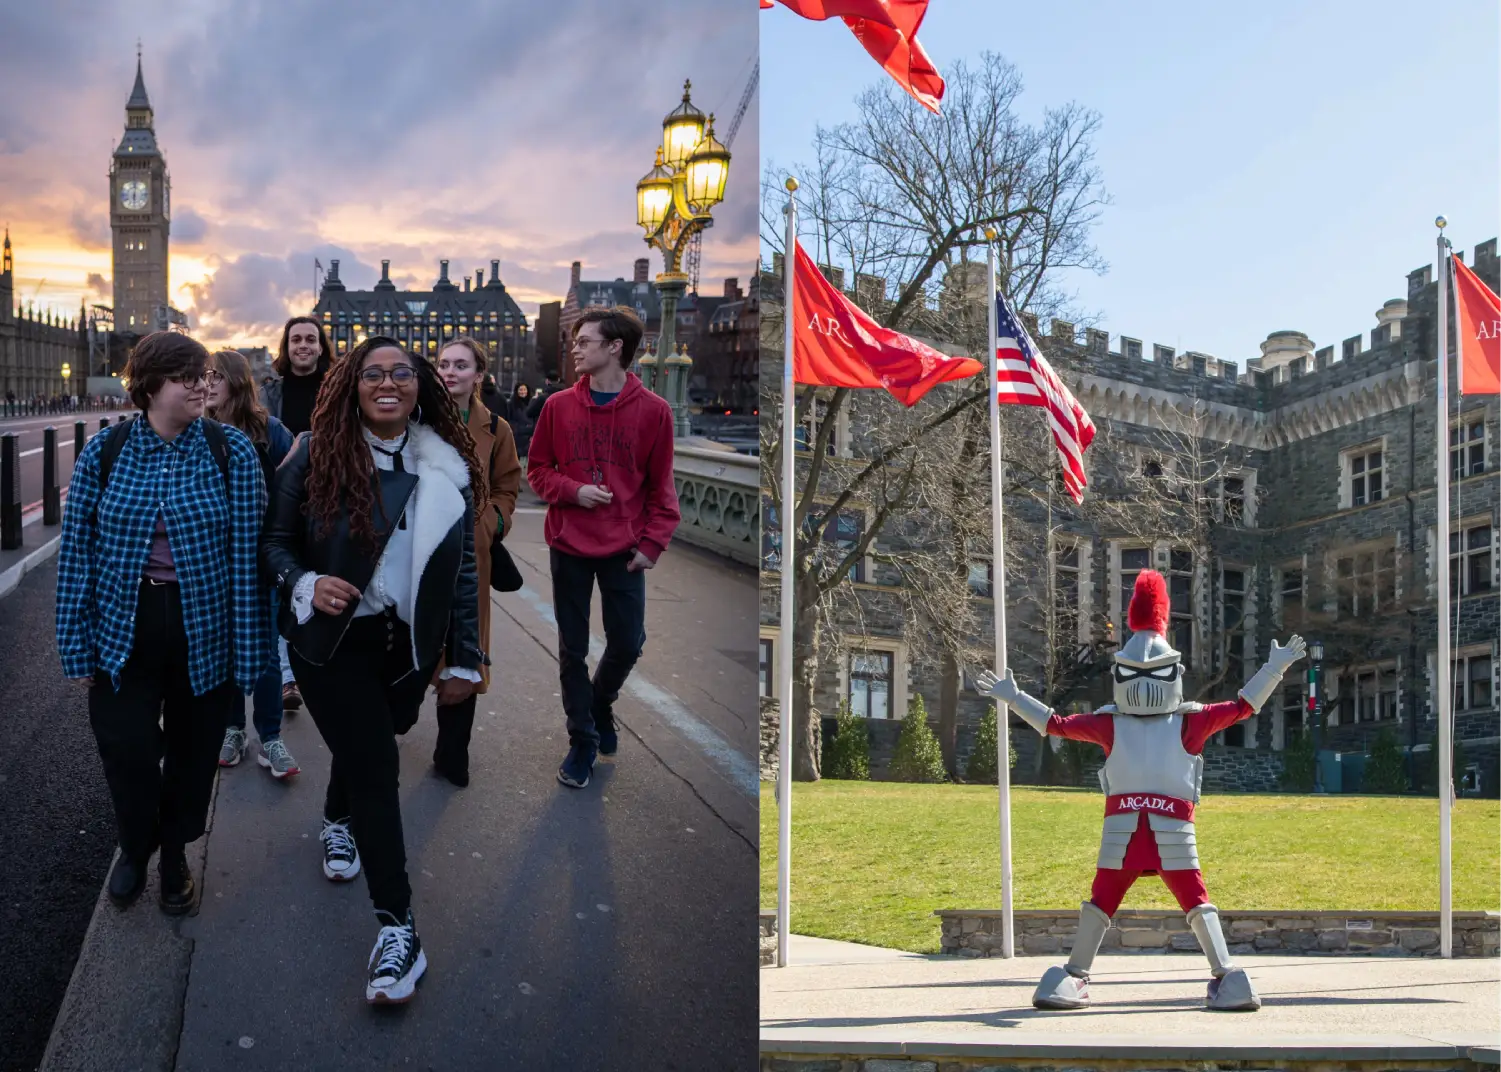 Collage of students in London and the Knight mascot on campus